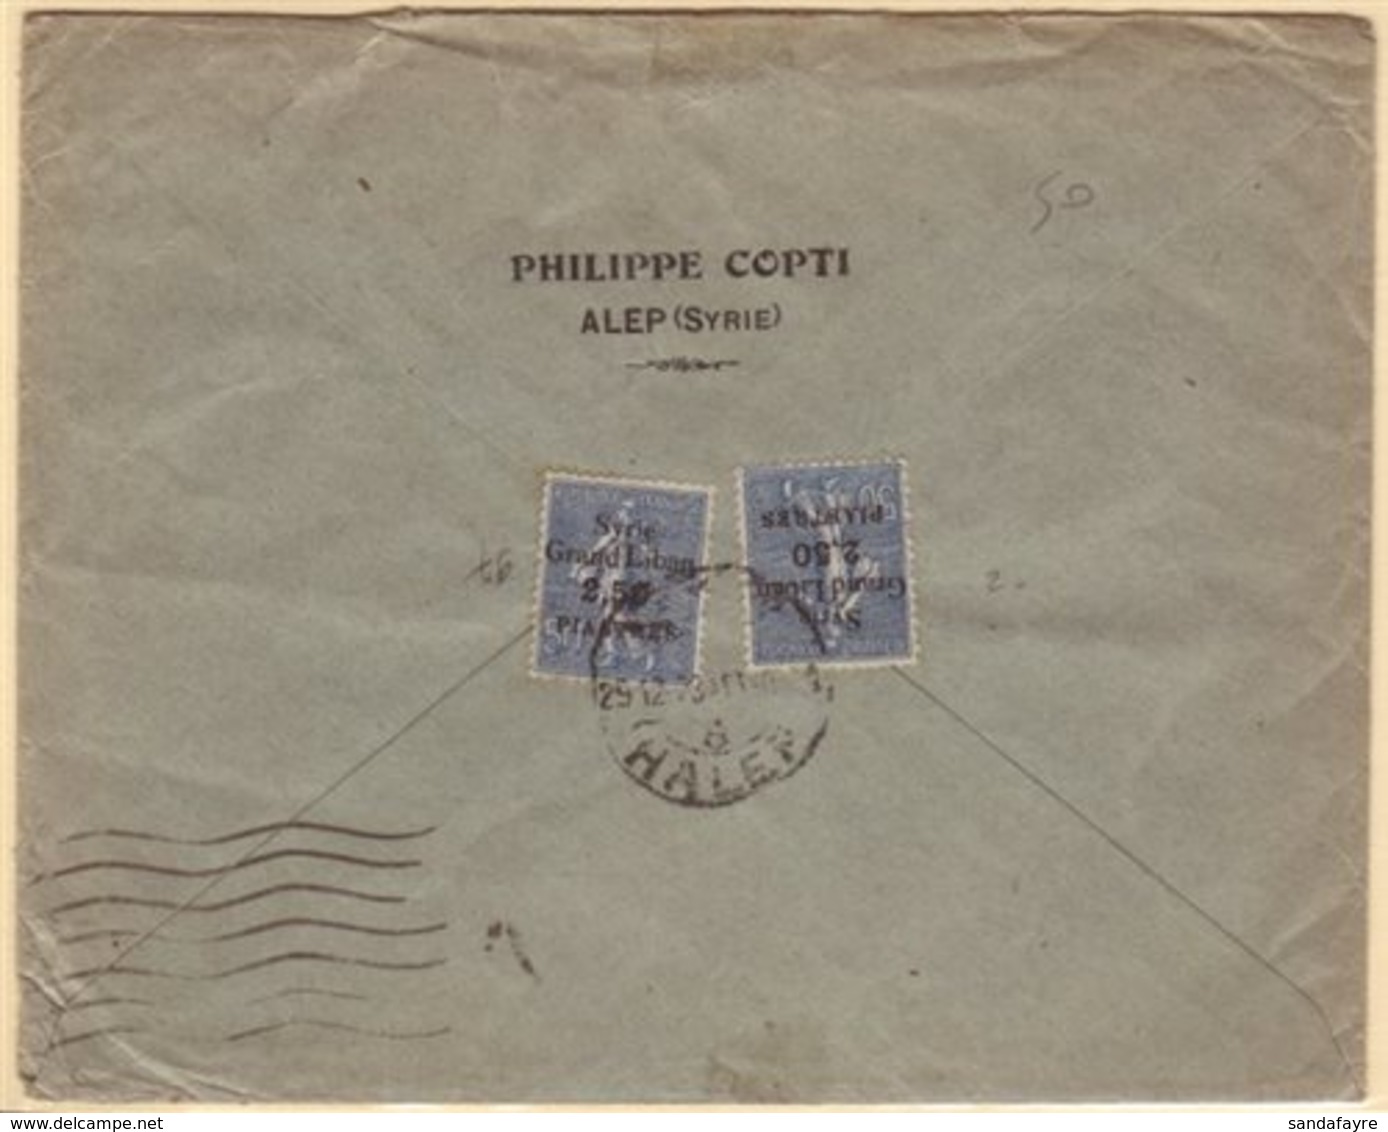 1923 Commercial Cover To France, Franked Two 1923 2.50pi On 50c "Syrie Grand Liban" Overprints, SG 105, HALEP C.d.s. Can - Syrien